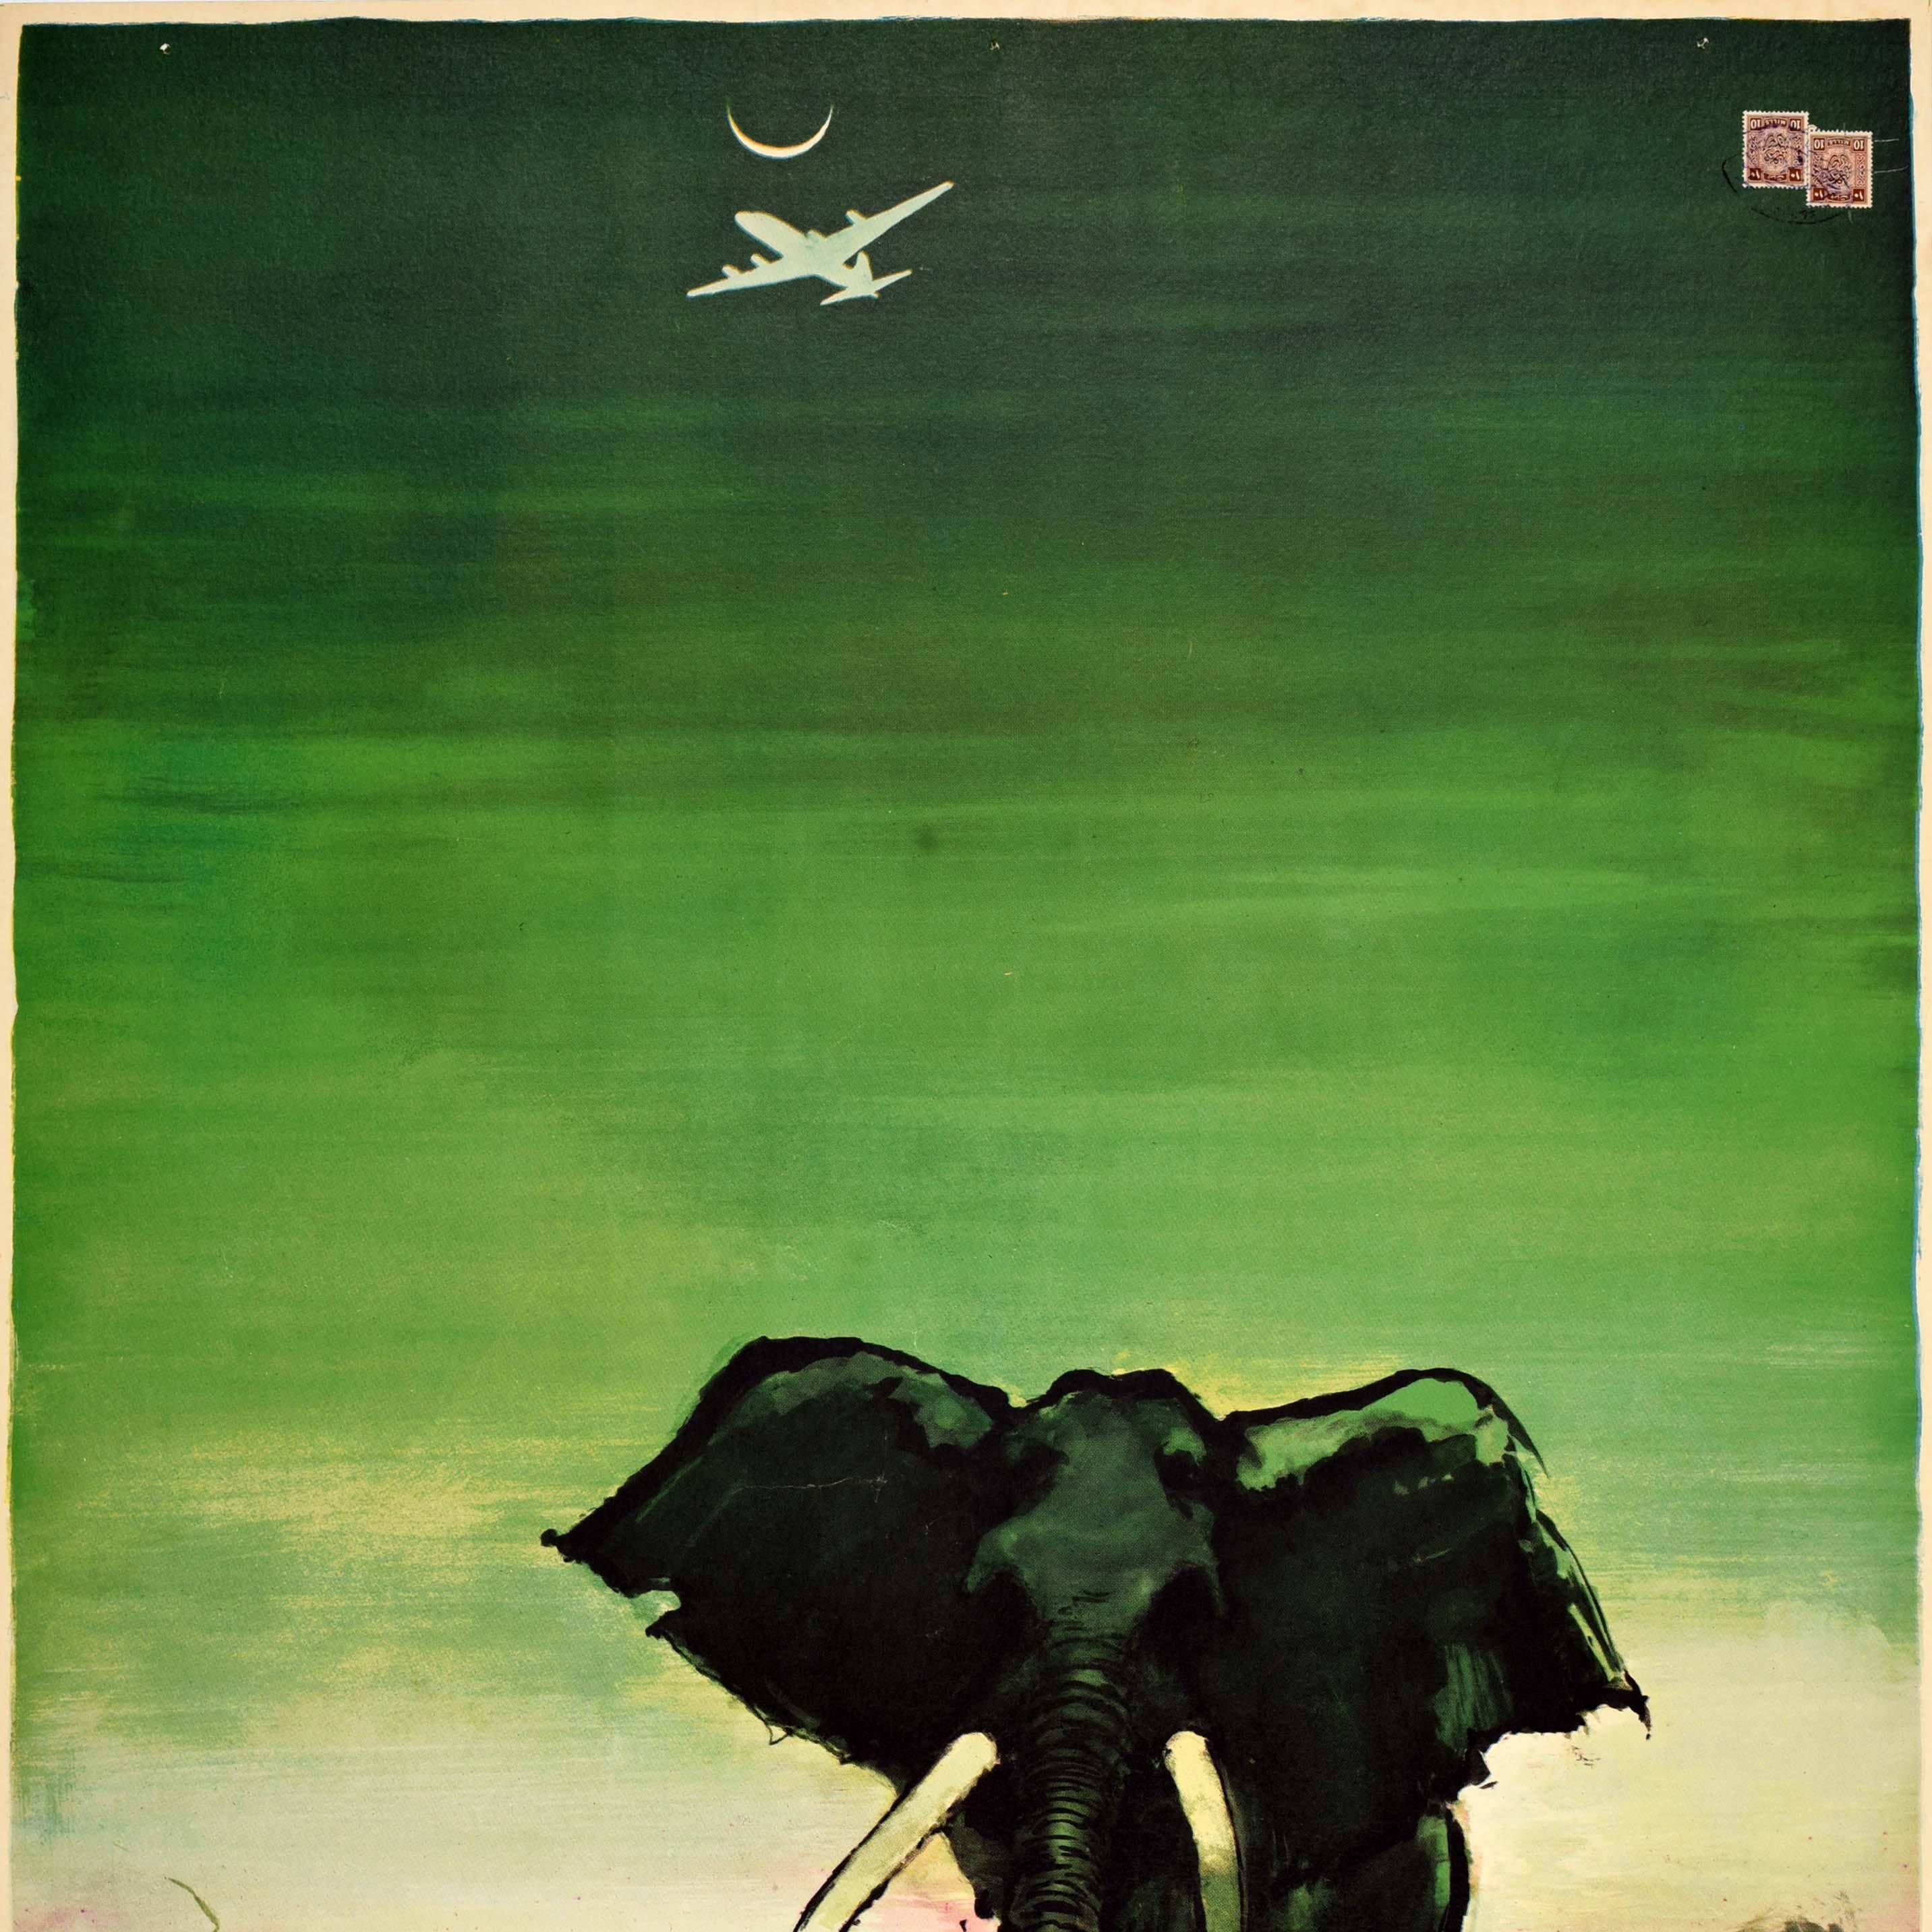 Original vintage travel poster - Africa by SAS Scandinavian Airlines System - featuring stunning artwork by the notable Danish artist Otto Nielsen (1916-2000) of elephants walking in the Savannah towards the viewer with a plane flying below a